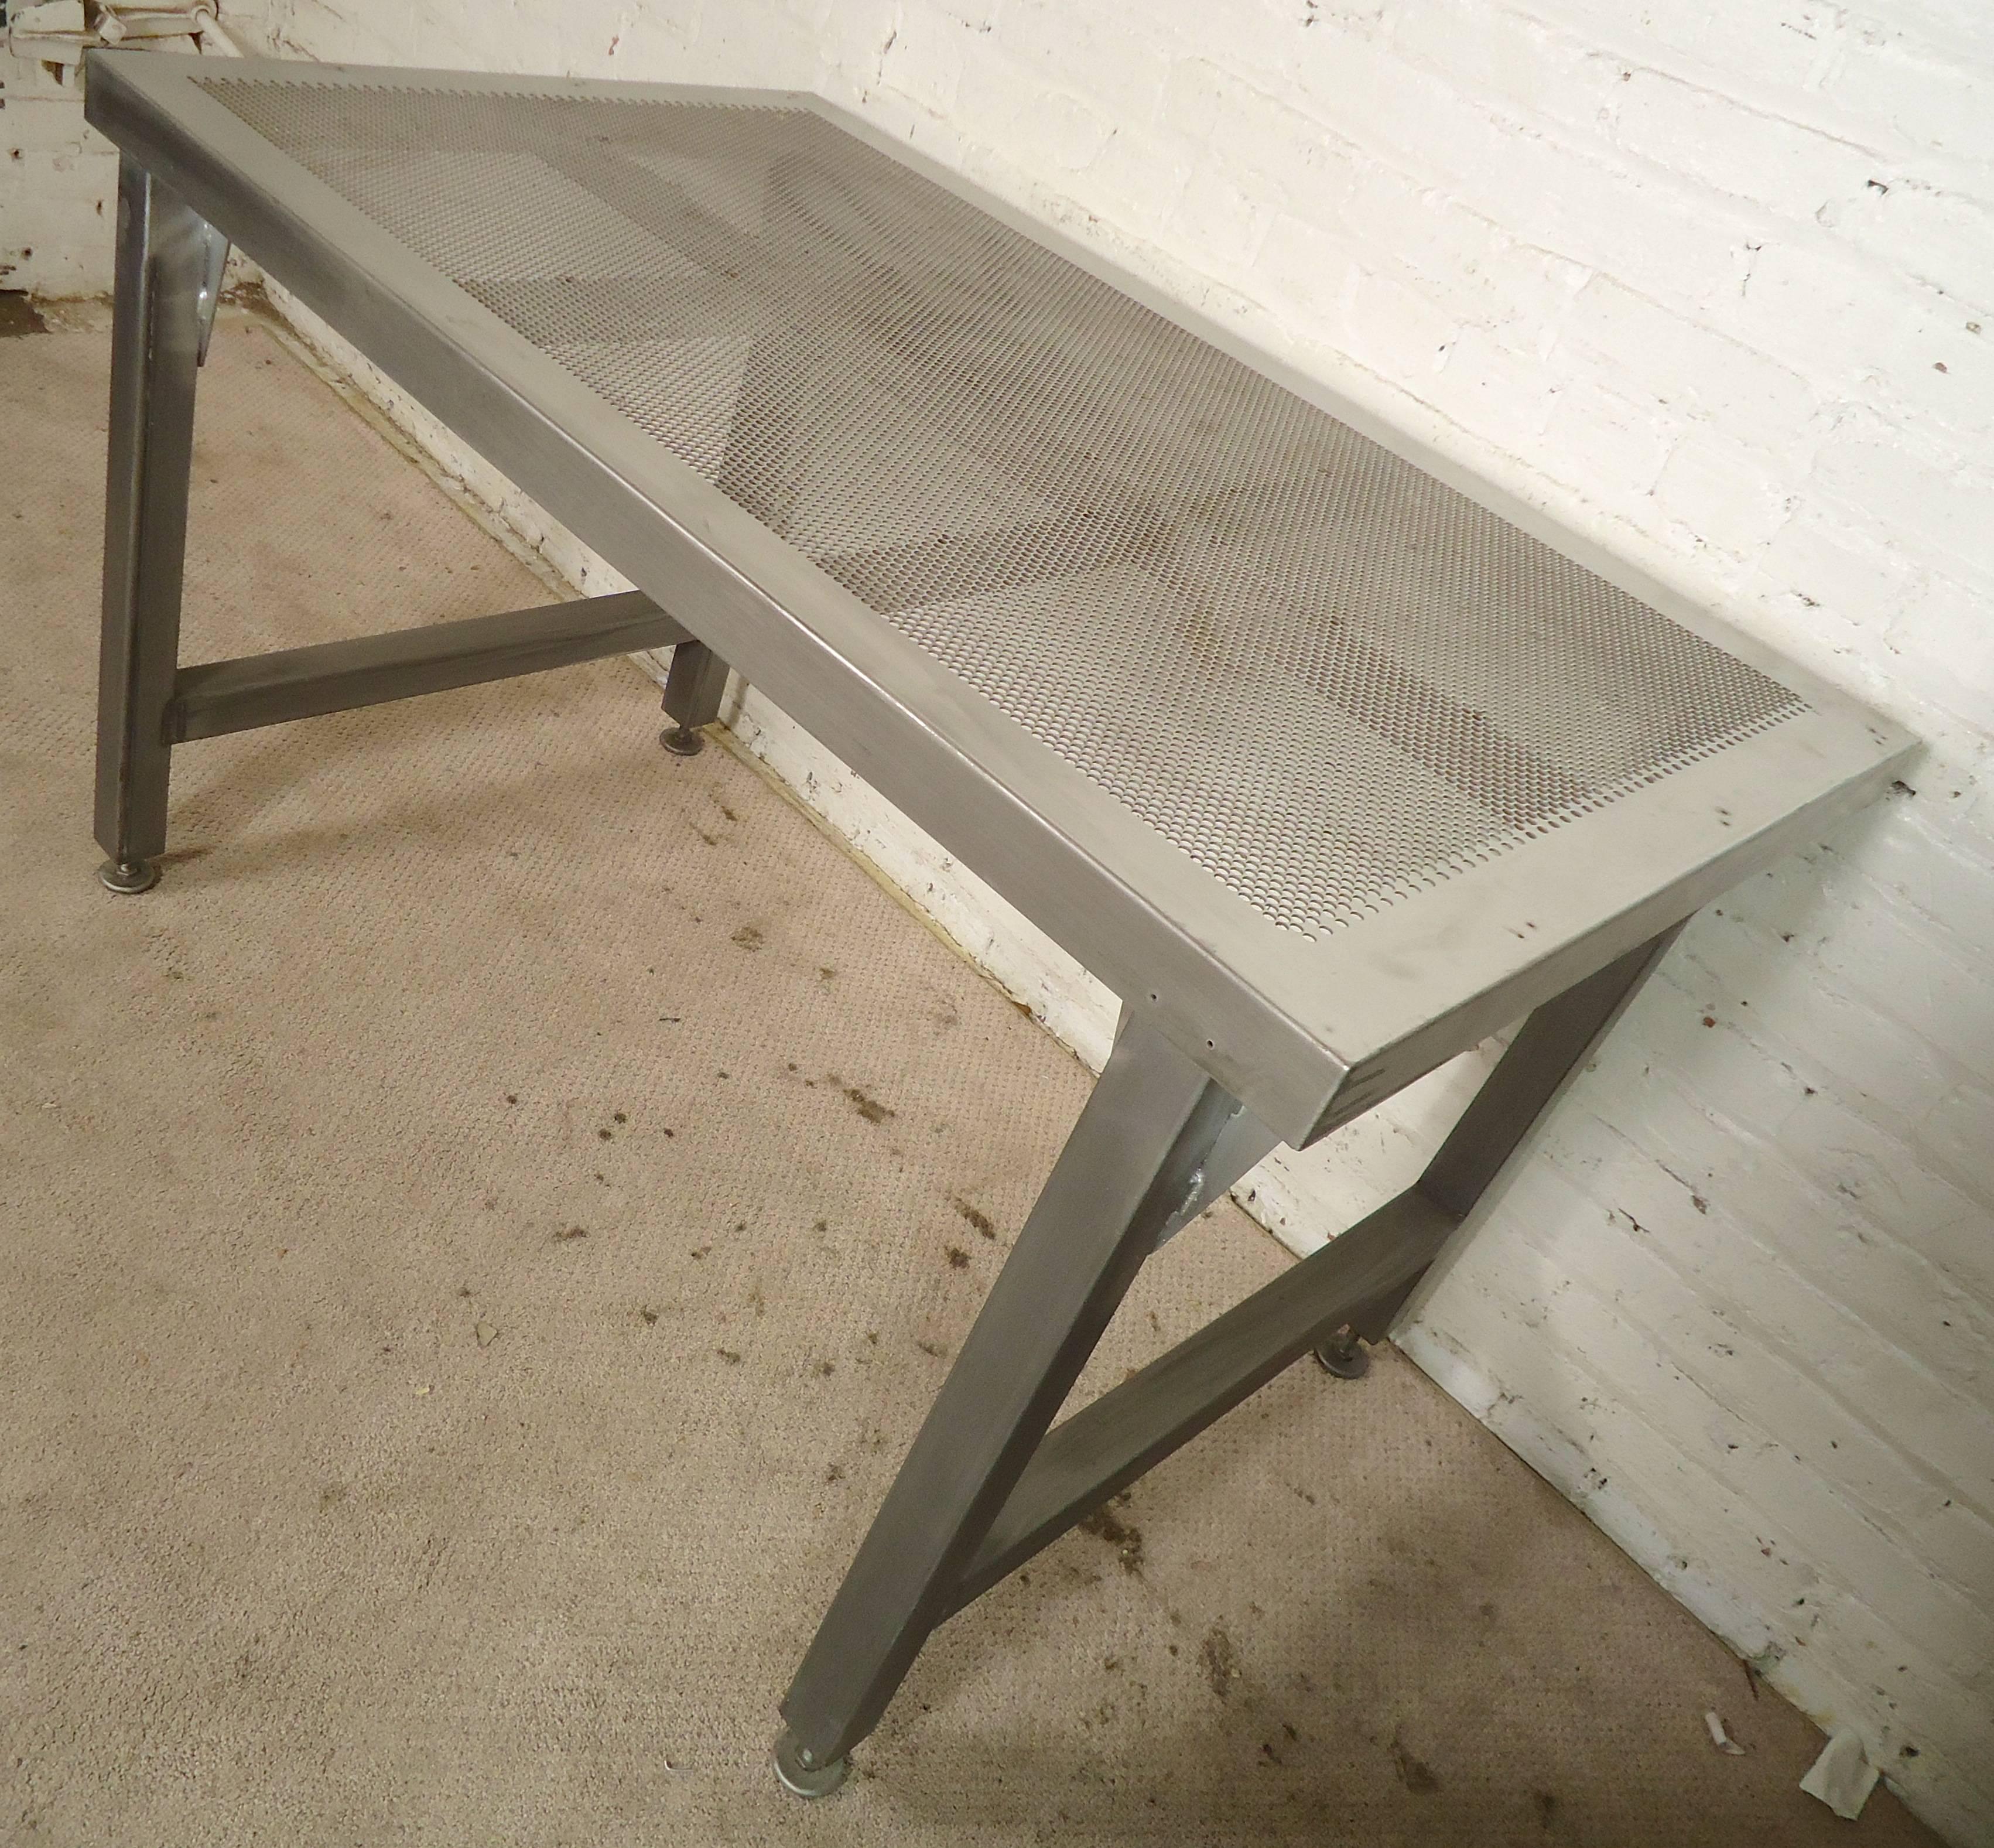 Industrial style table with perforated top and adjustable feet. Gives a strong factory look to your modern home.

(Please confirm item location - NY or NJ - with dealer)
